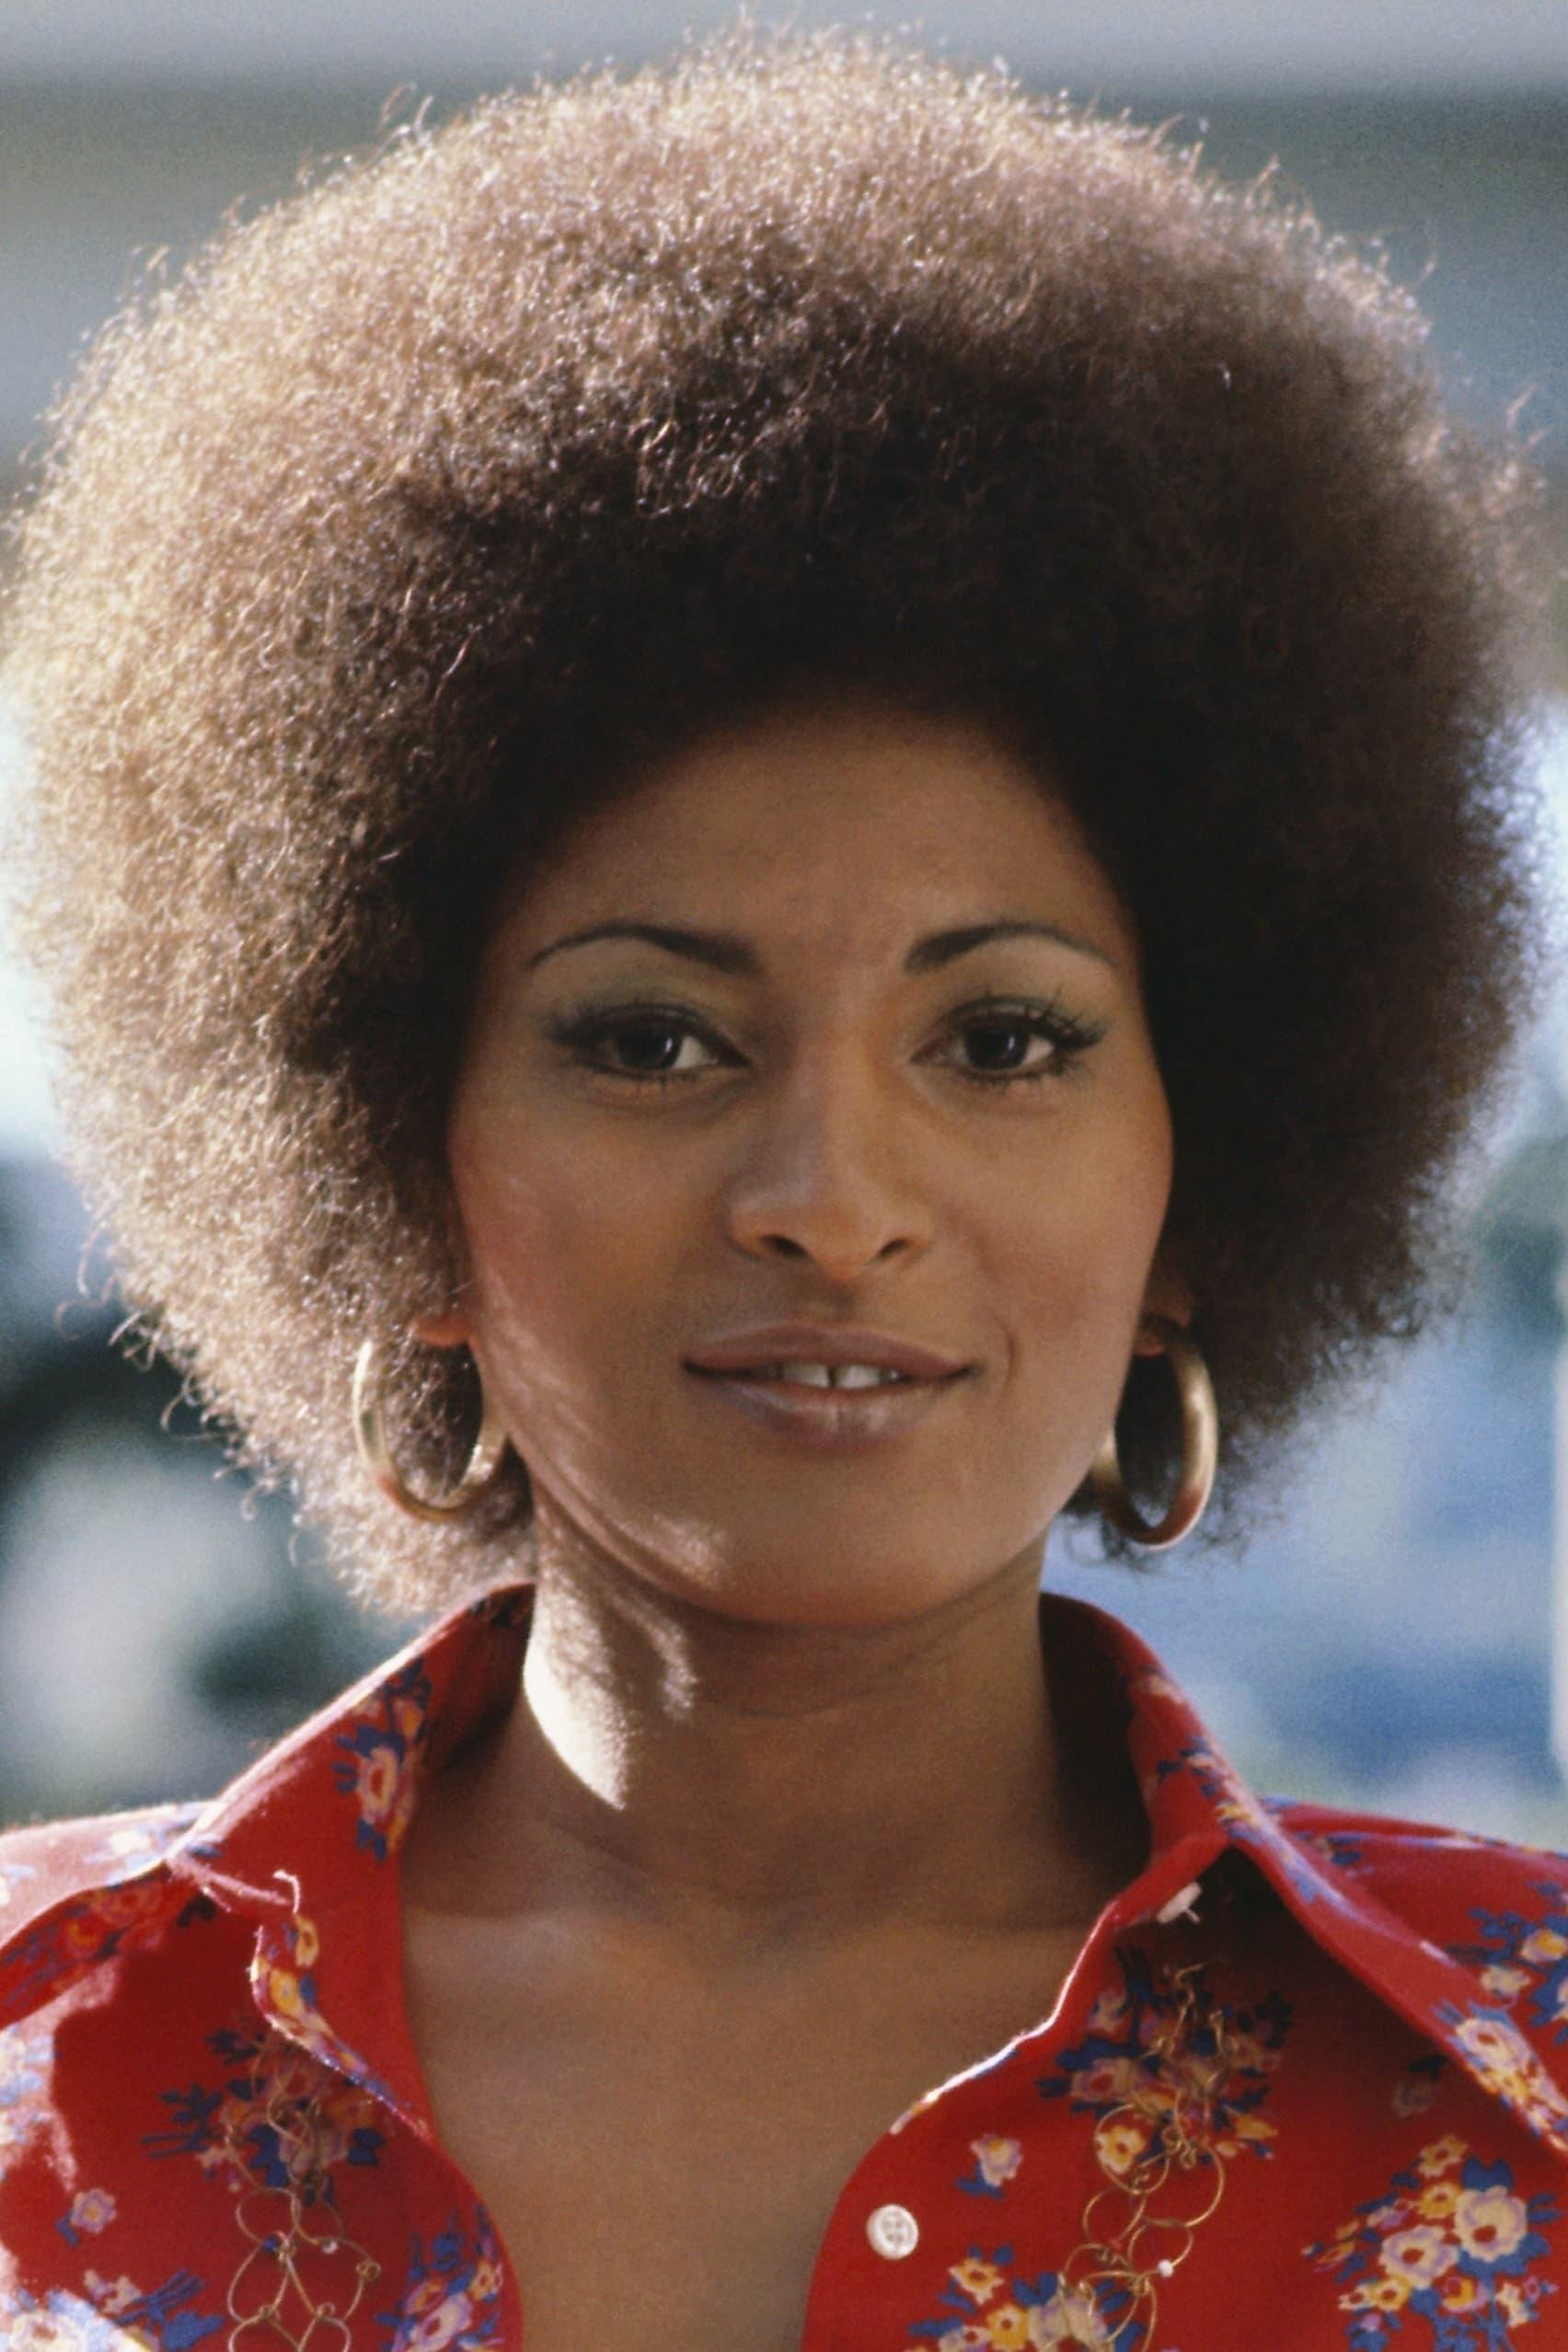 Pam Grier | Cathryn Bolan